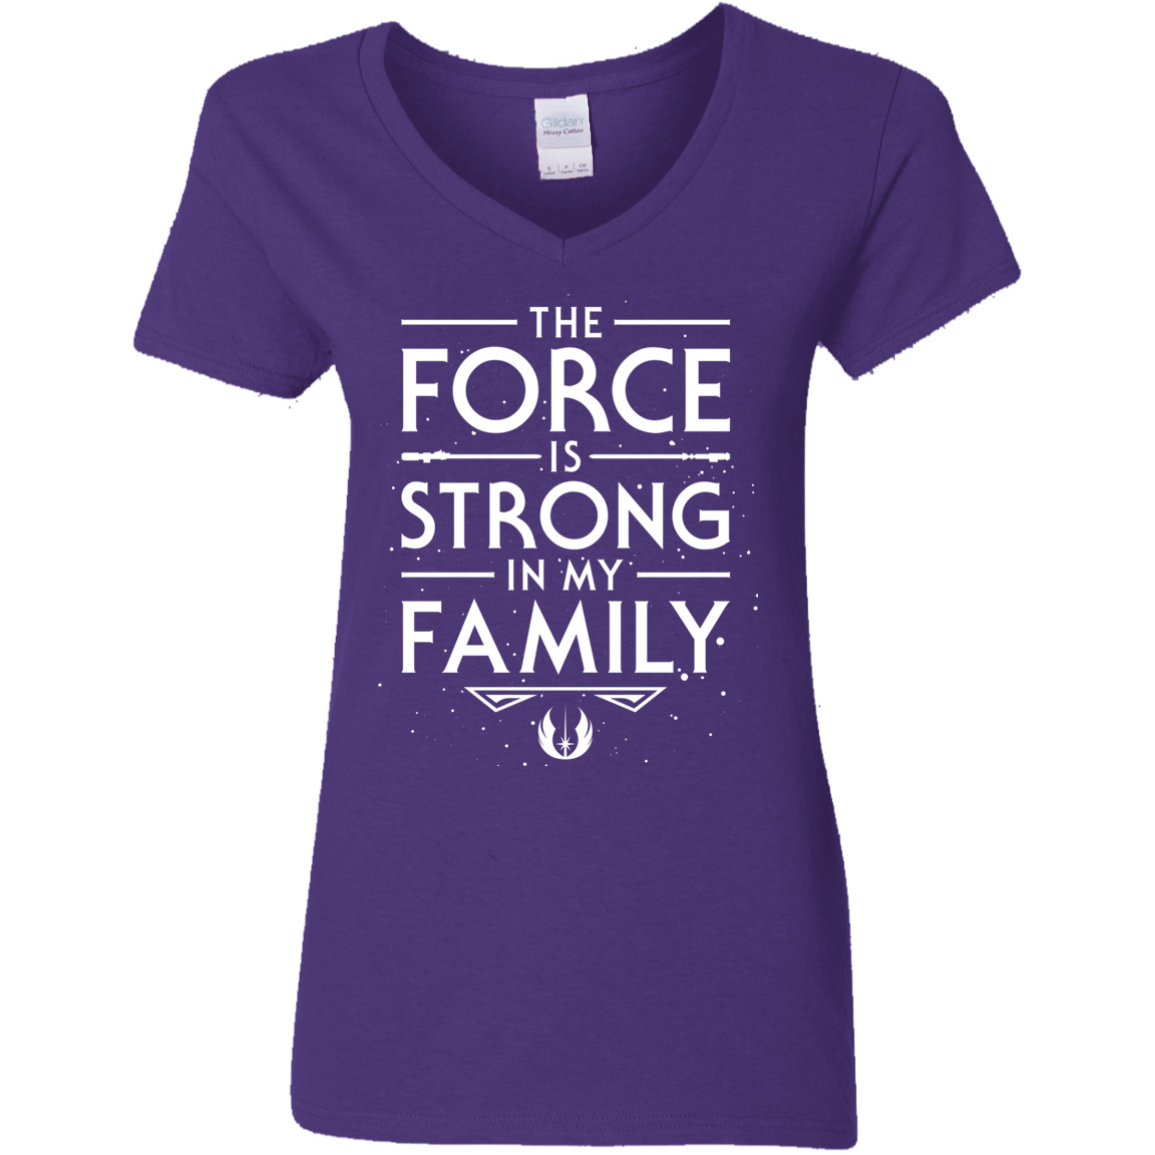 The Force is Strong in my Family Women's V-Neck T-Shirt